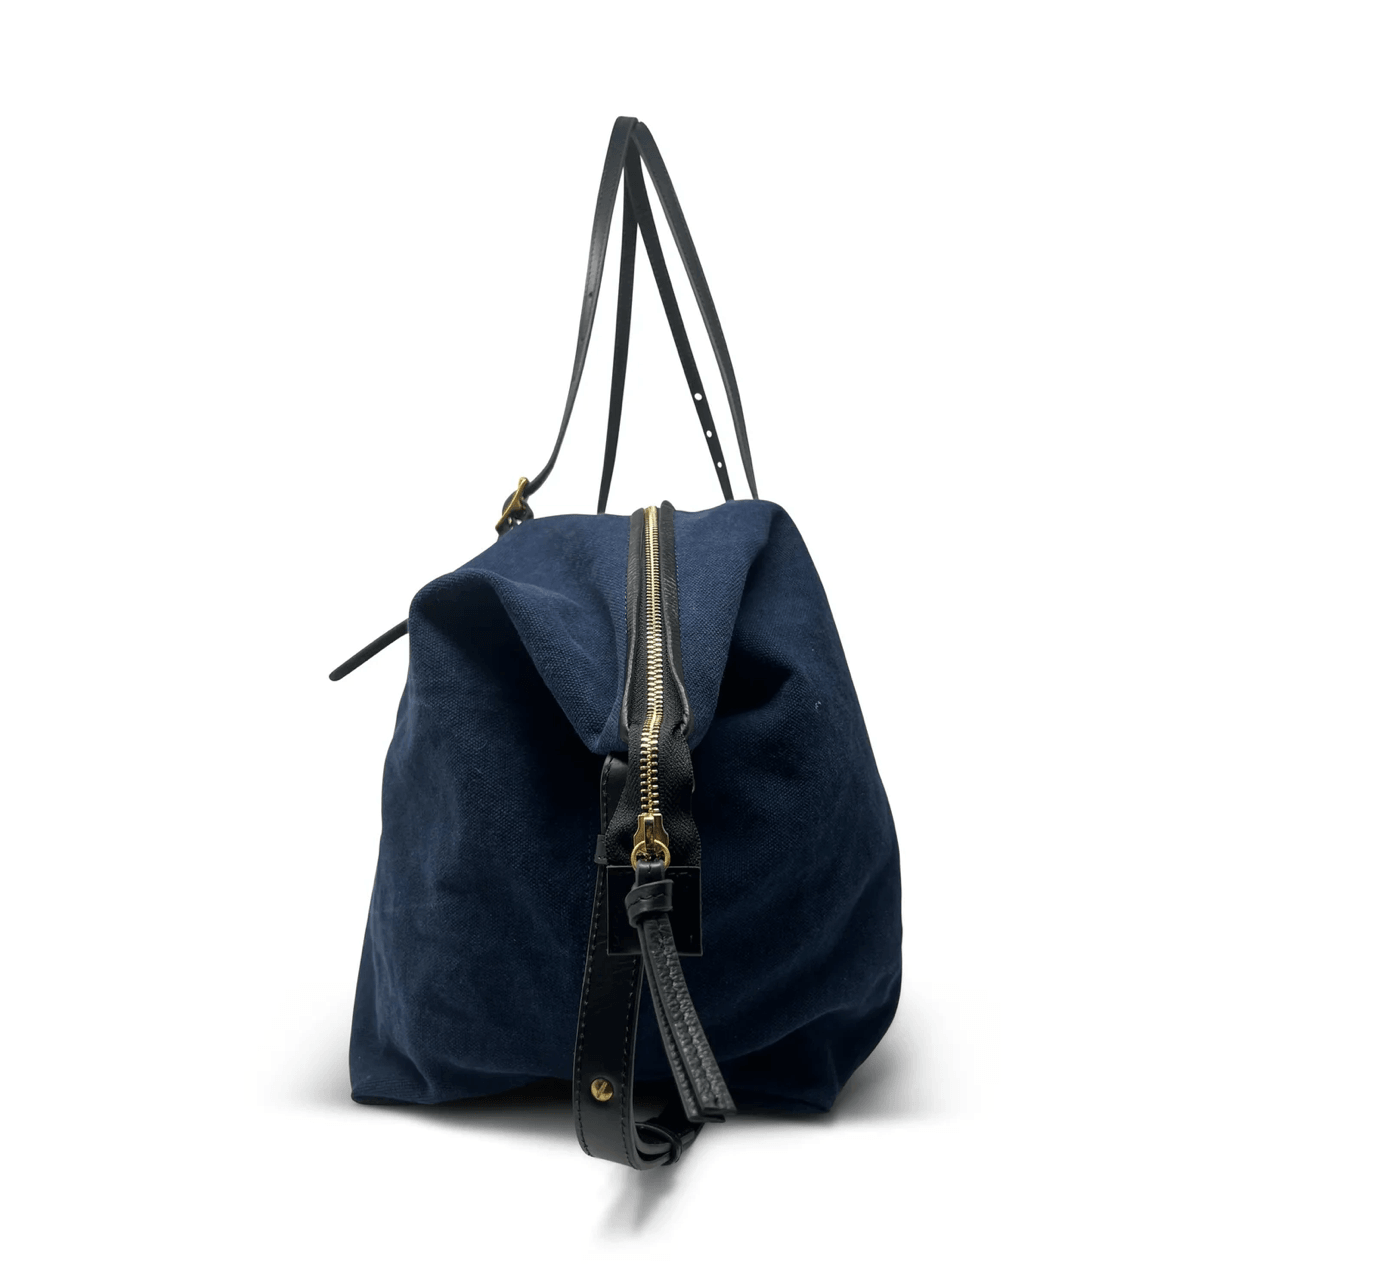 Washed Navy Canvas Crossbody Bag by Kempton & Co. - Haven